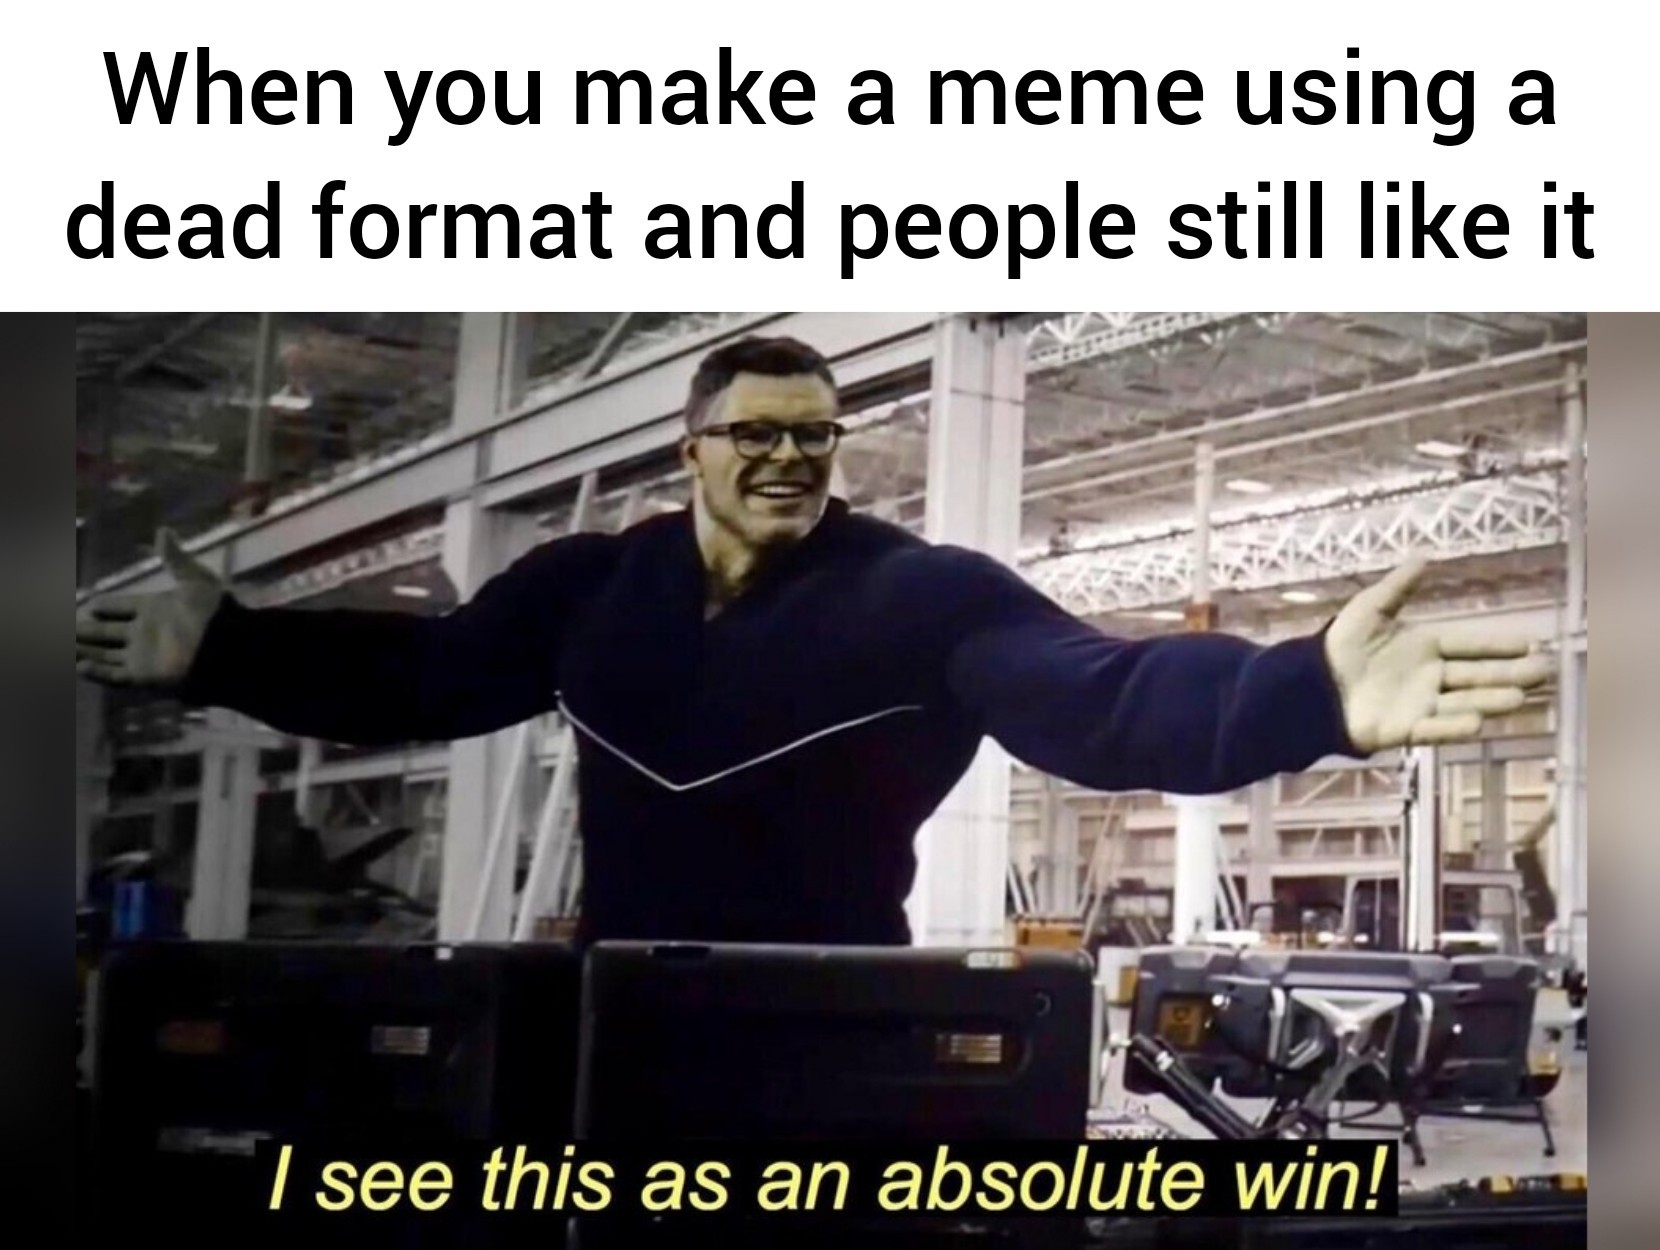 superhero meme - endgame memes - When you make a meme using a dead format and people still it I see this as an absolute win!